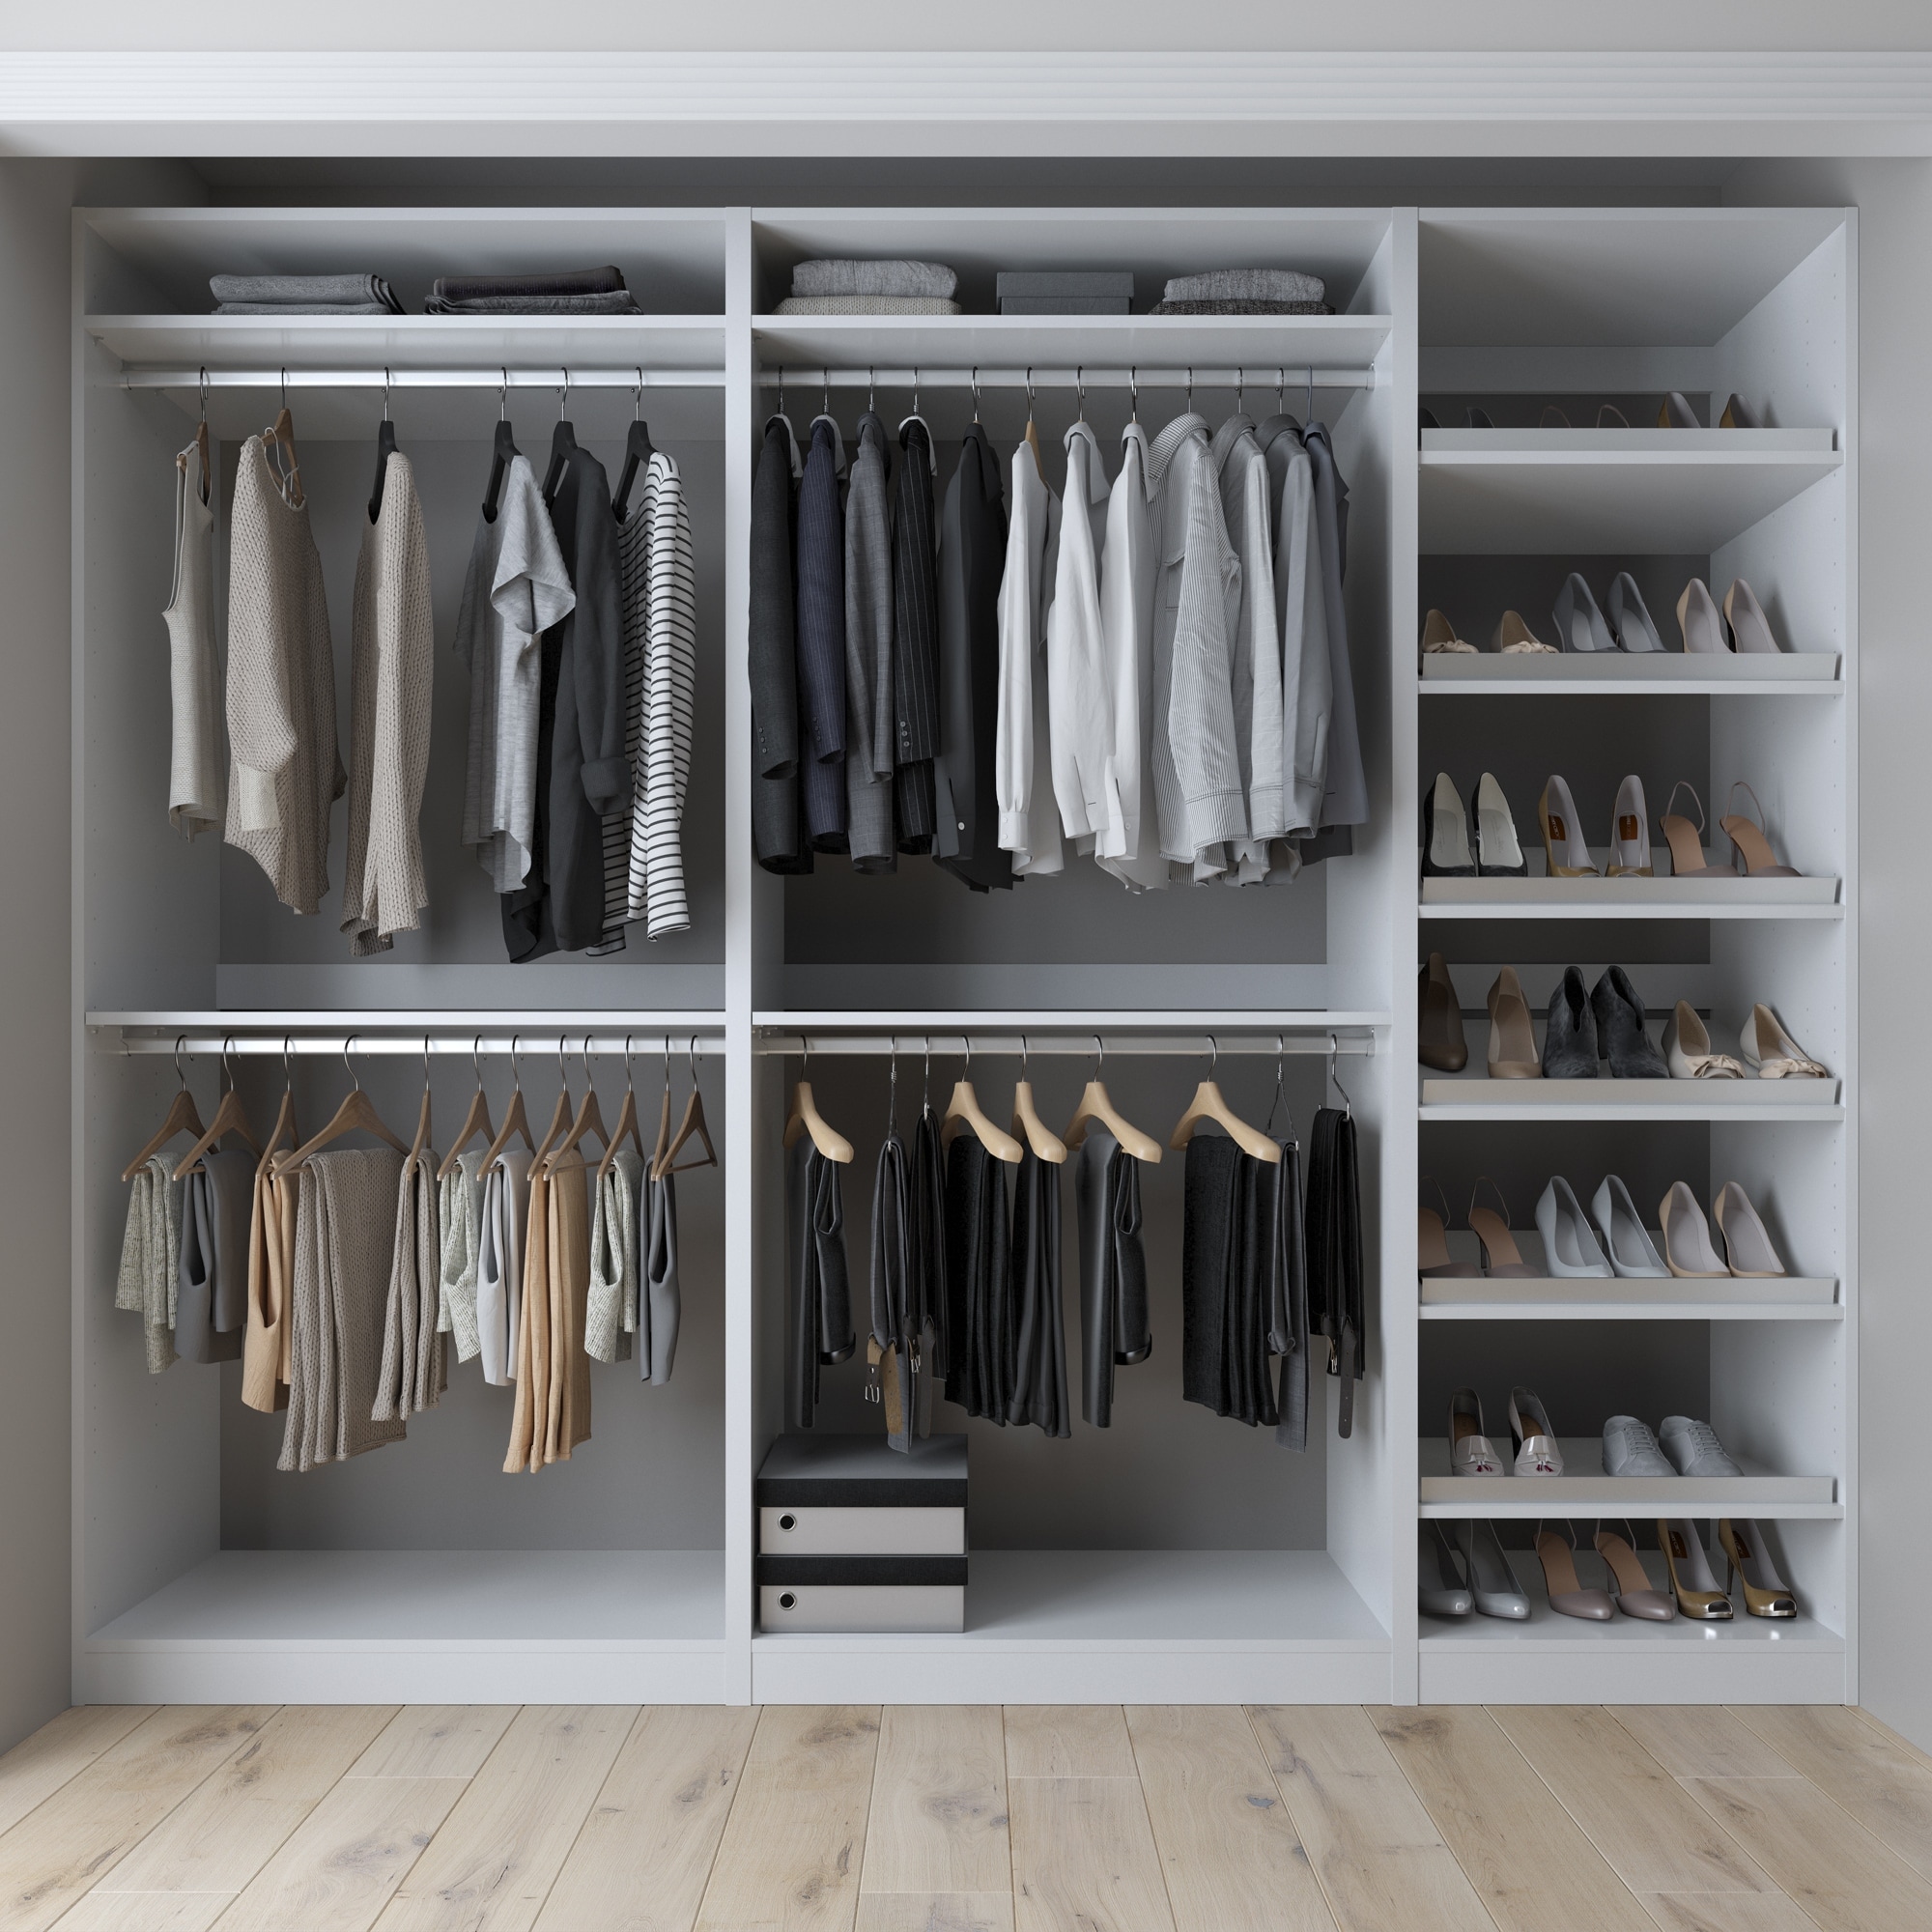 https://ak1.ostkcdn.com/images/products/is/images/direct/7743ac105b2e4e73c90c414a2686ec20d43eca6a/96%22-Custom-Closet-System-Reach-in.jpg